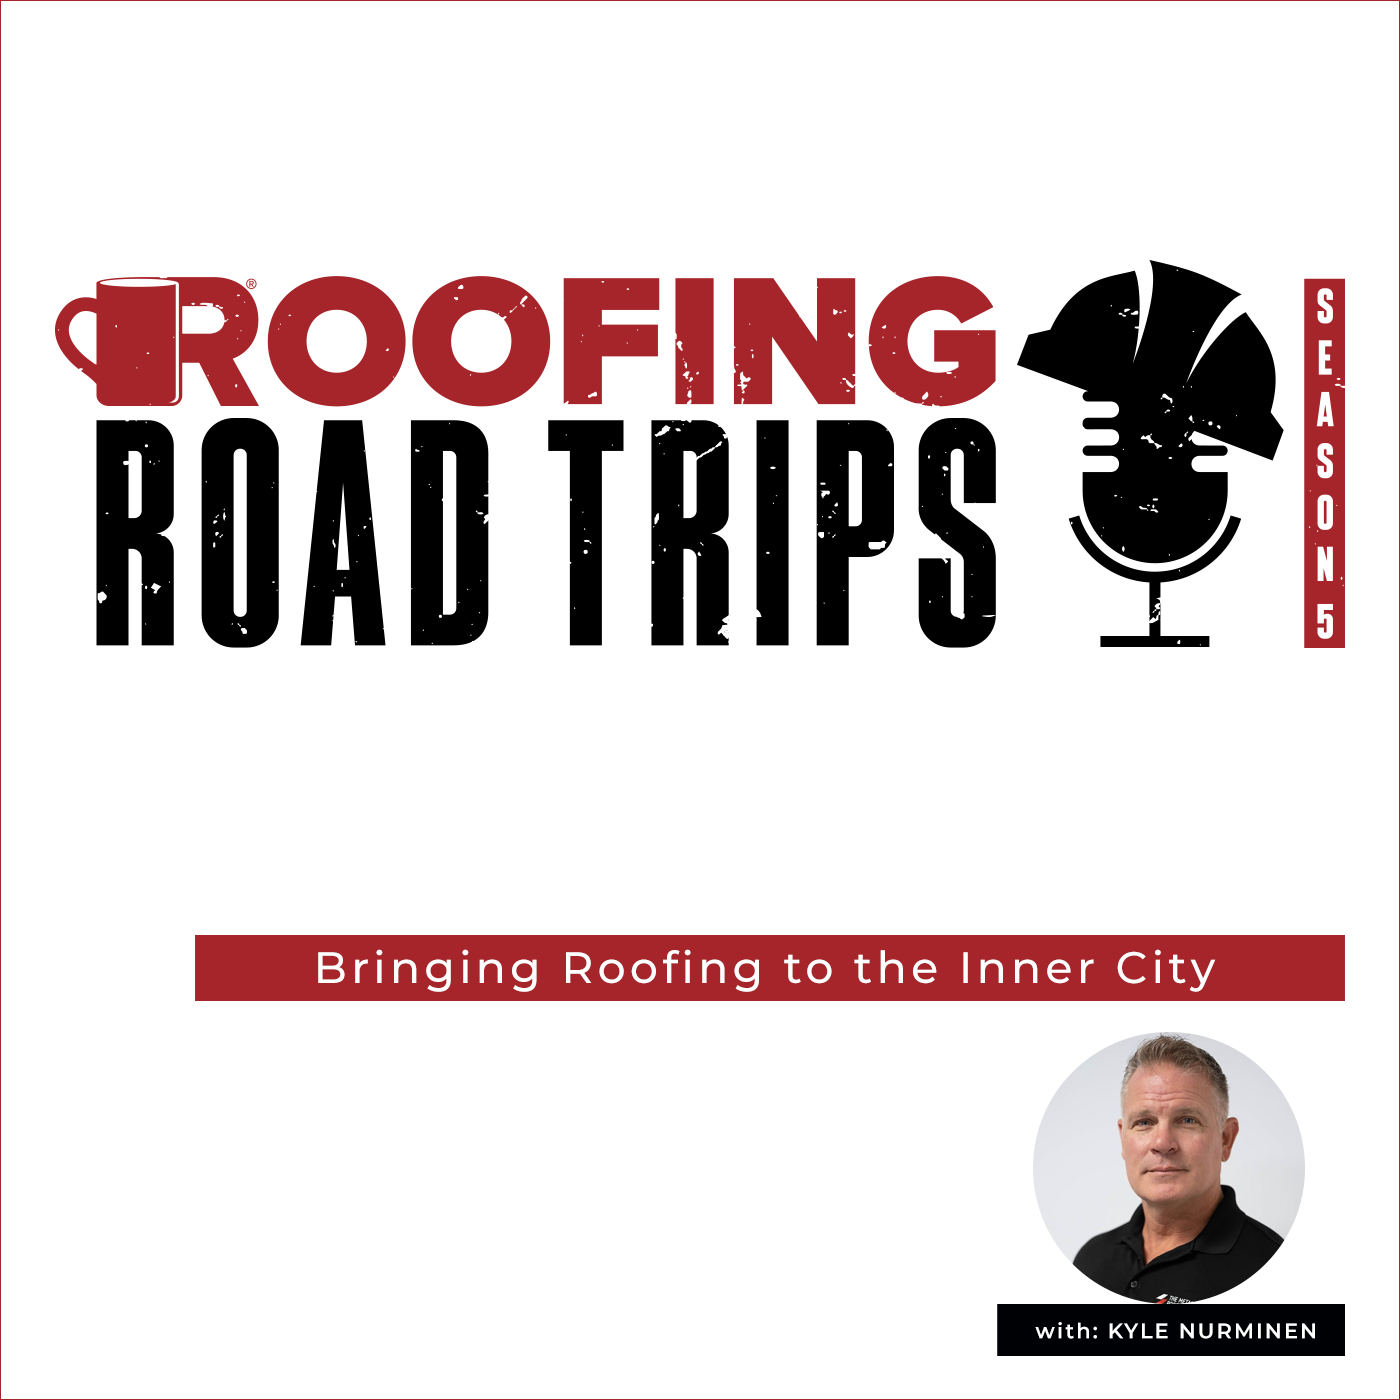 Kyle Nurminen and Sarah Ramon - Bringing Roofing to the Inner City